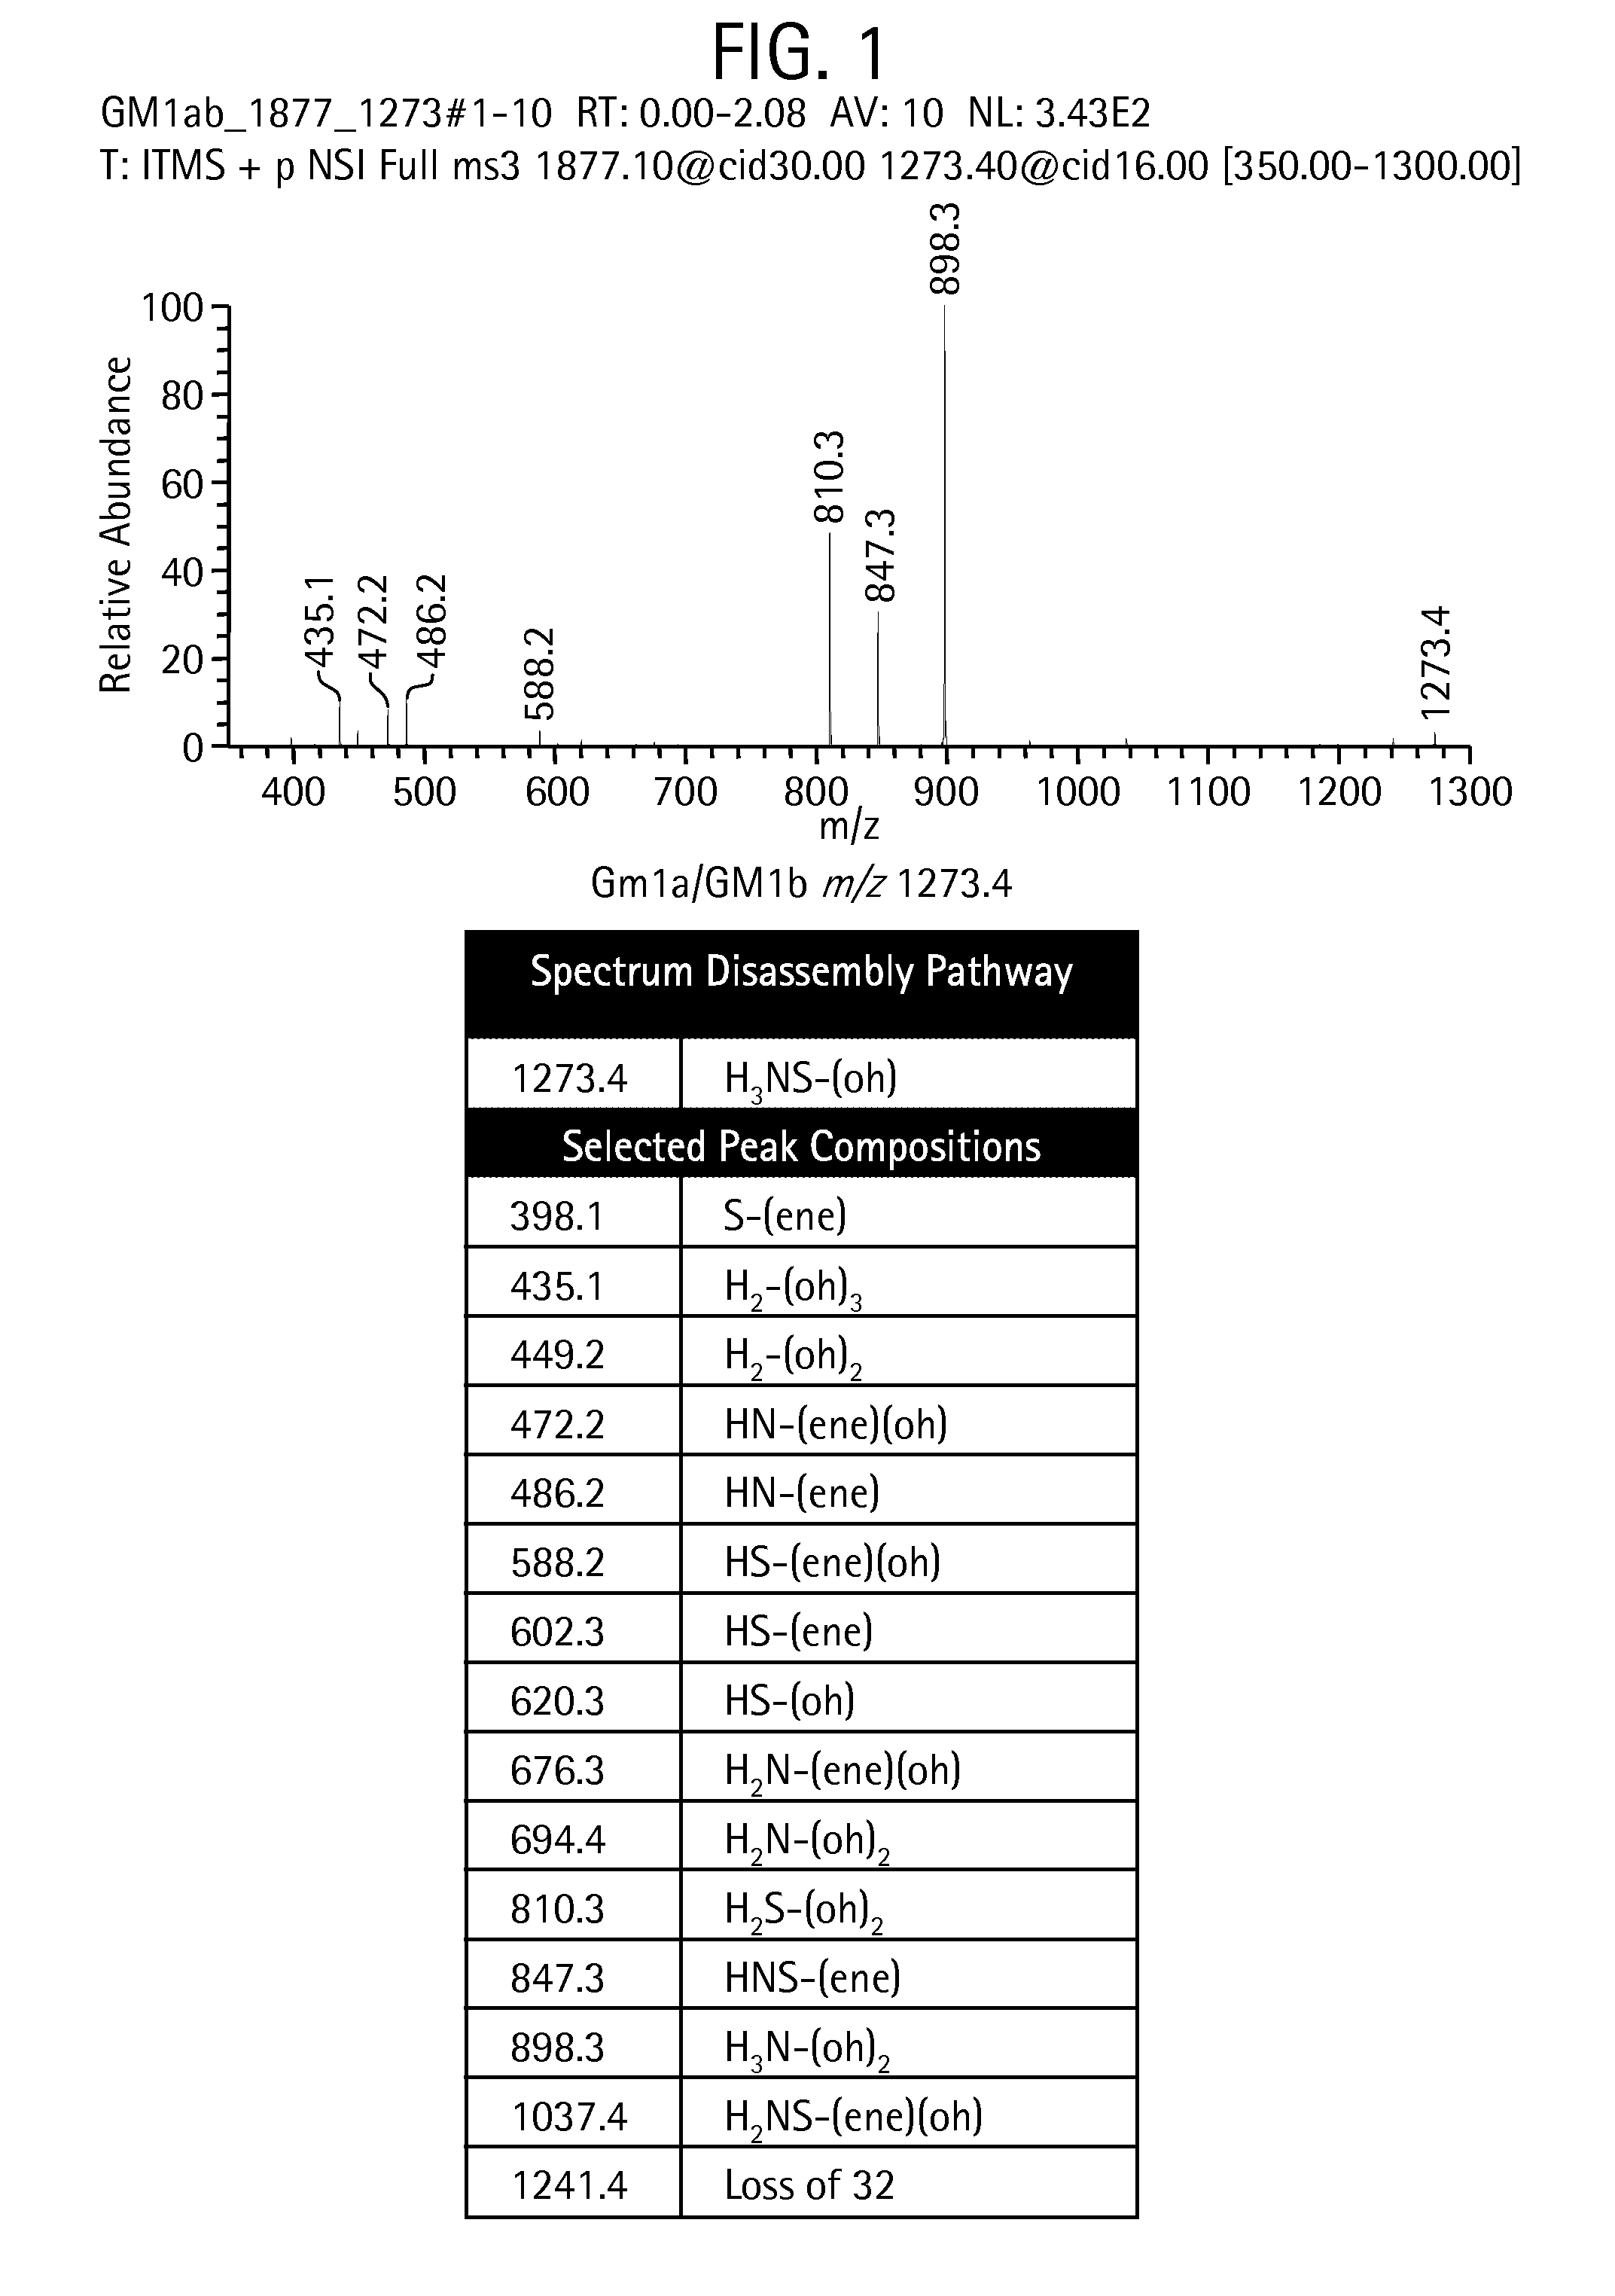 Methods for structural analysis of glycans